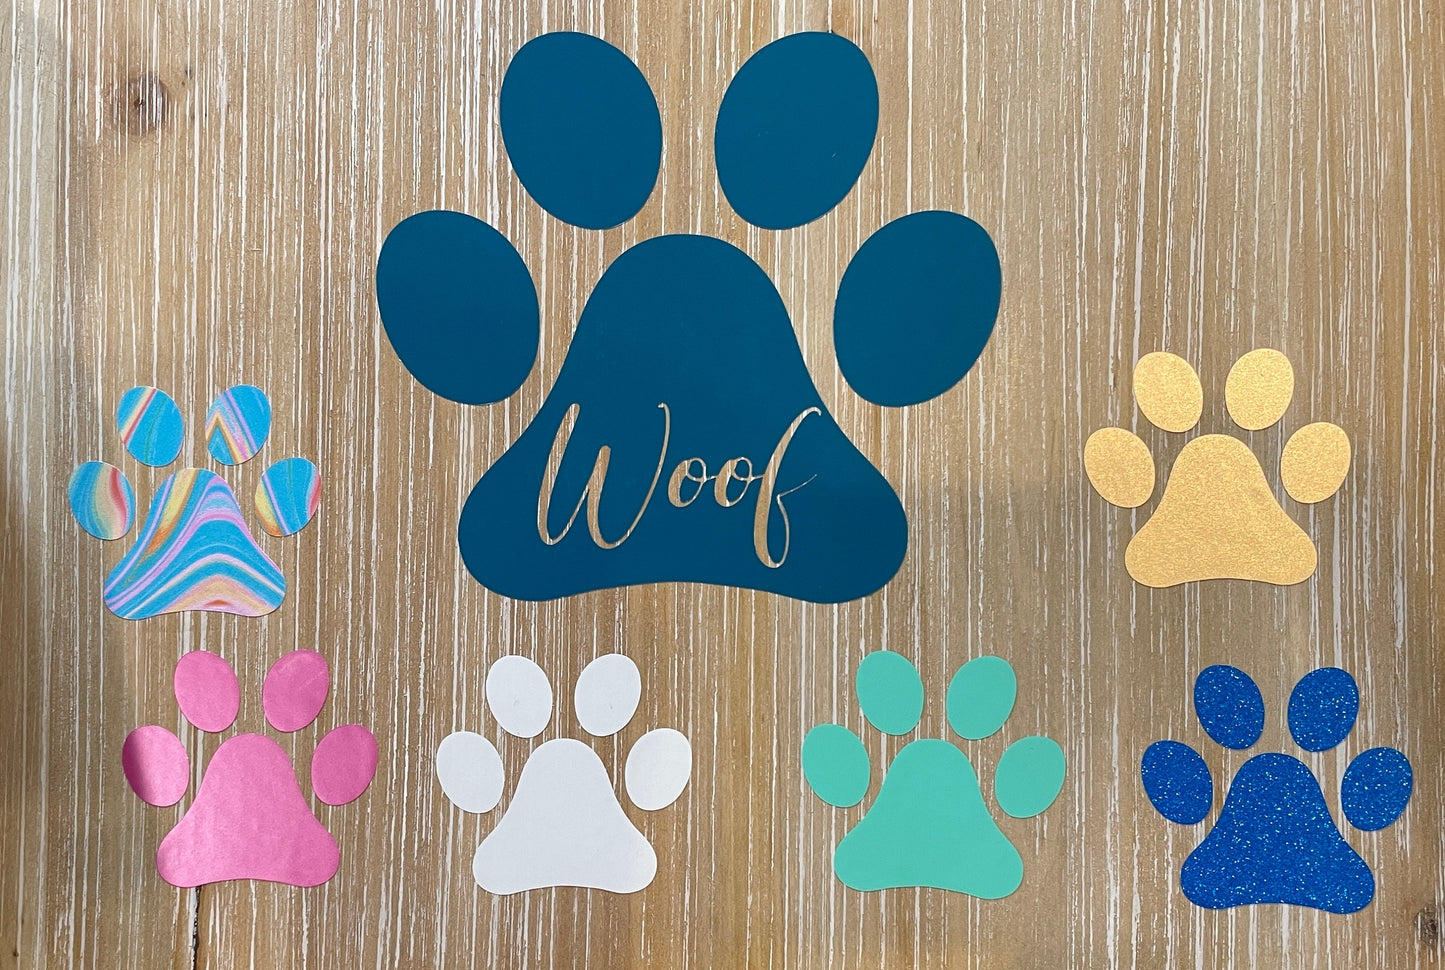 Paw Print with "Woof" cut out Window Decal